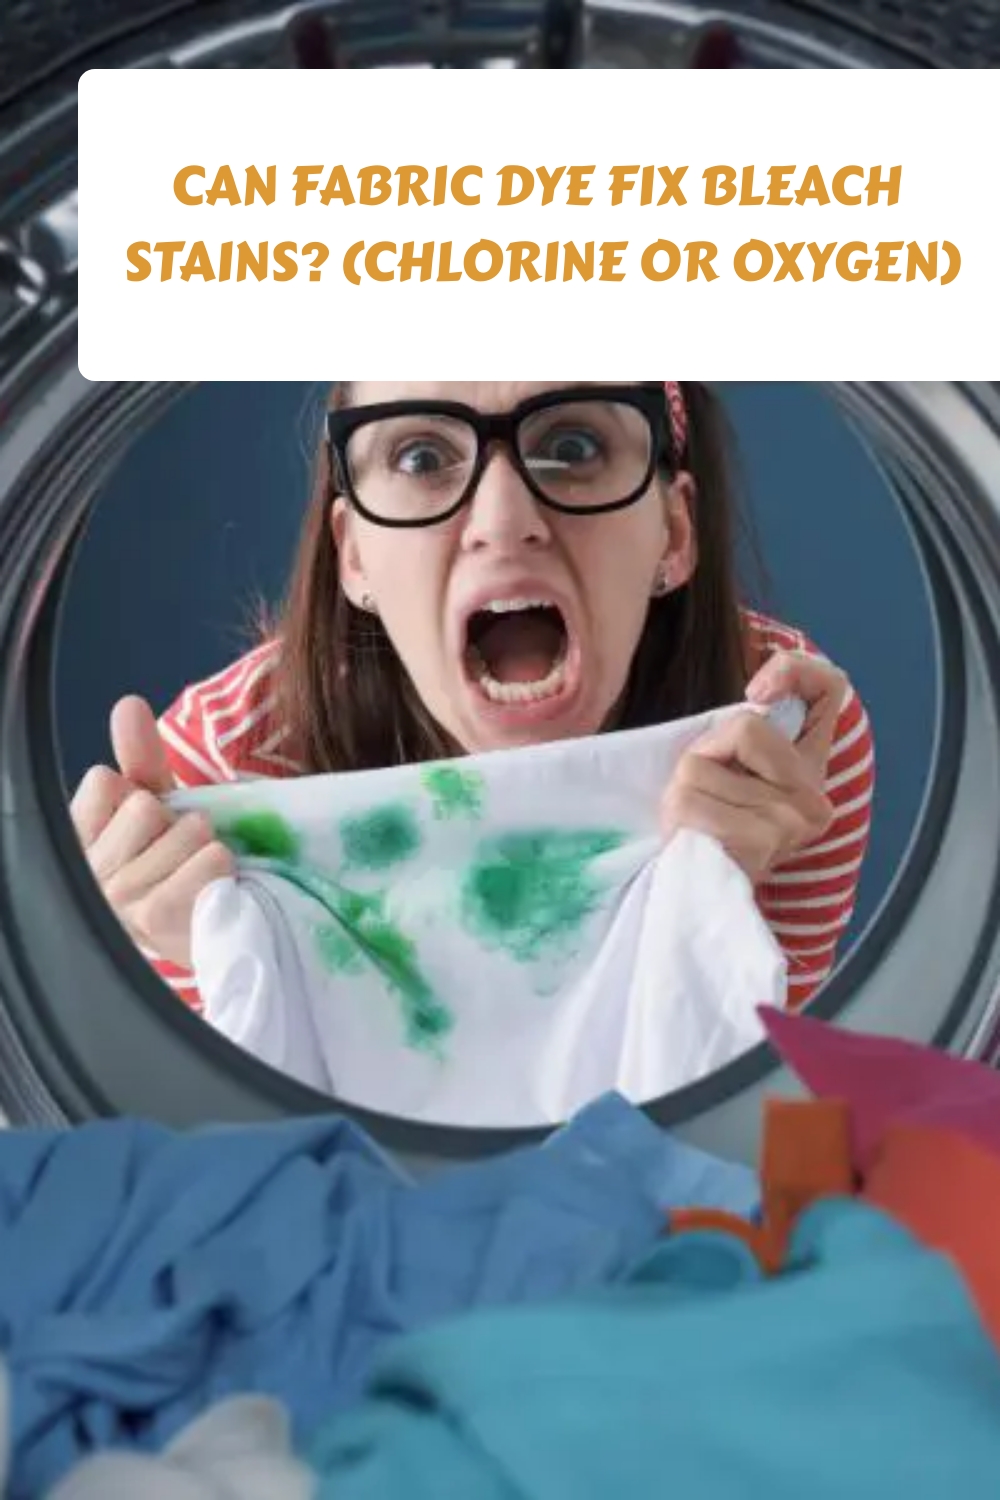 Can Fabric Dye Fix Bleach Stains Chlorine or Oxygen generated pin 39338